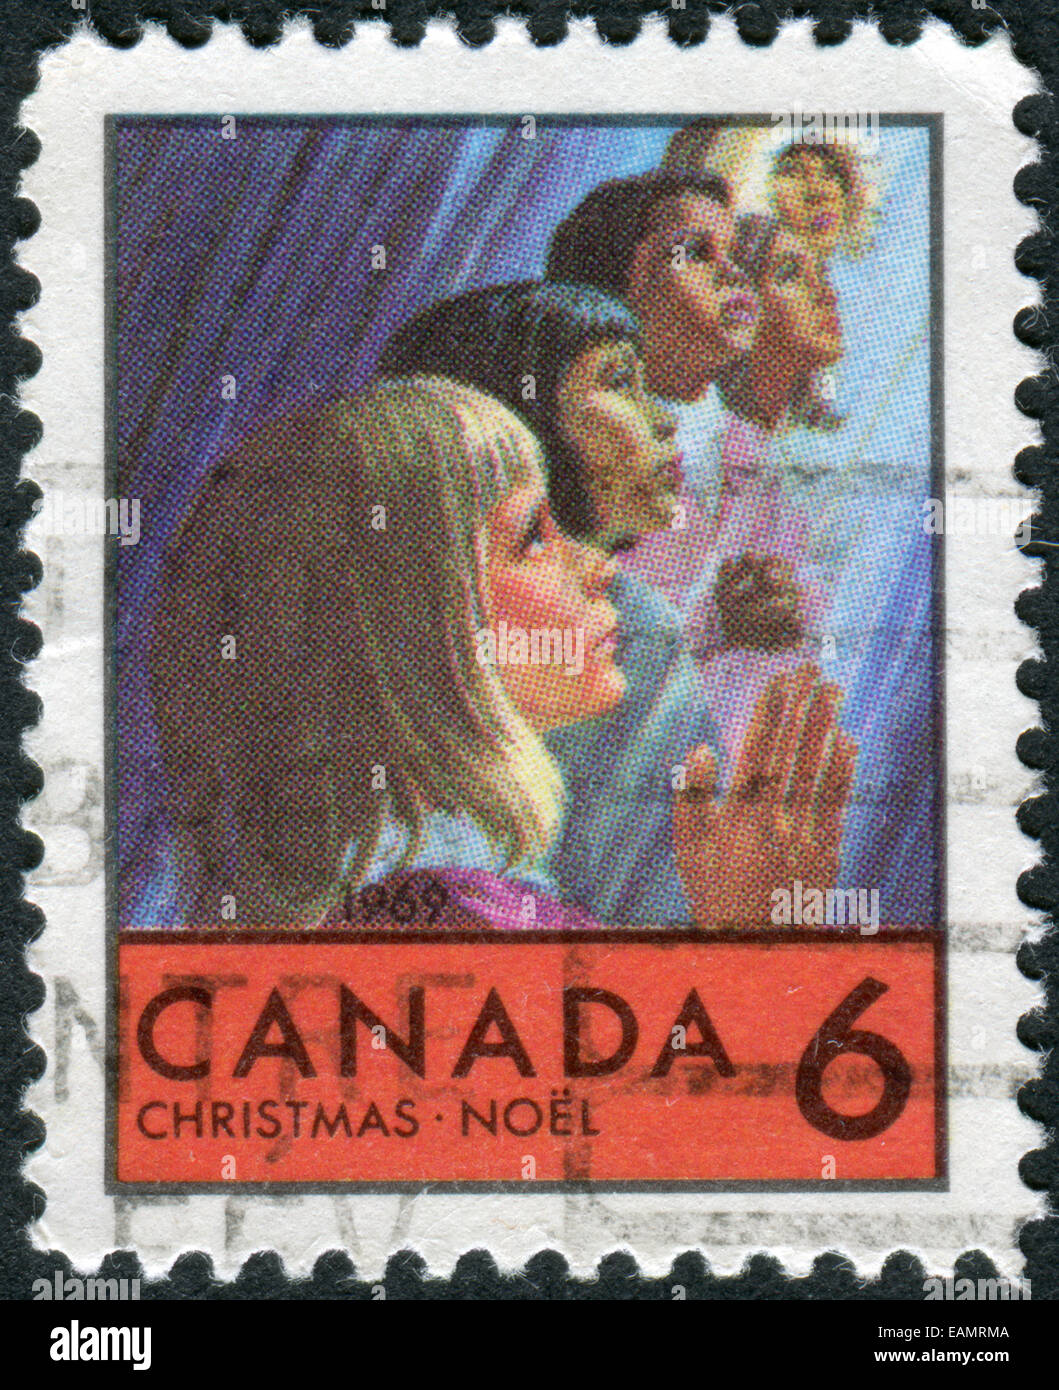 CANADA - CIRCA 1969: Postage stamp printed in Canada, Christmas issue, shows Children of Various races, circa 1969 Stock Photo